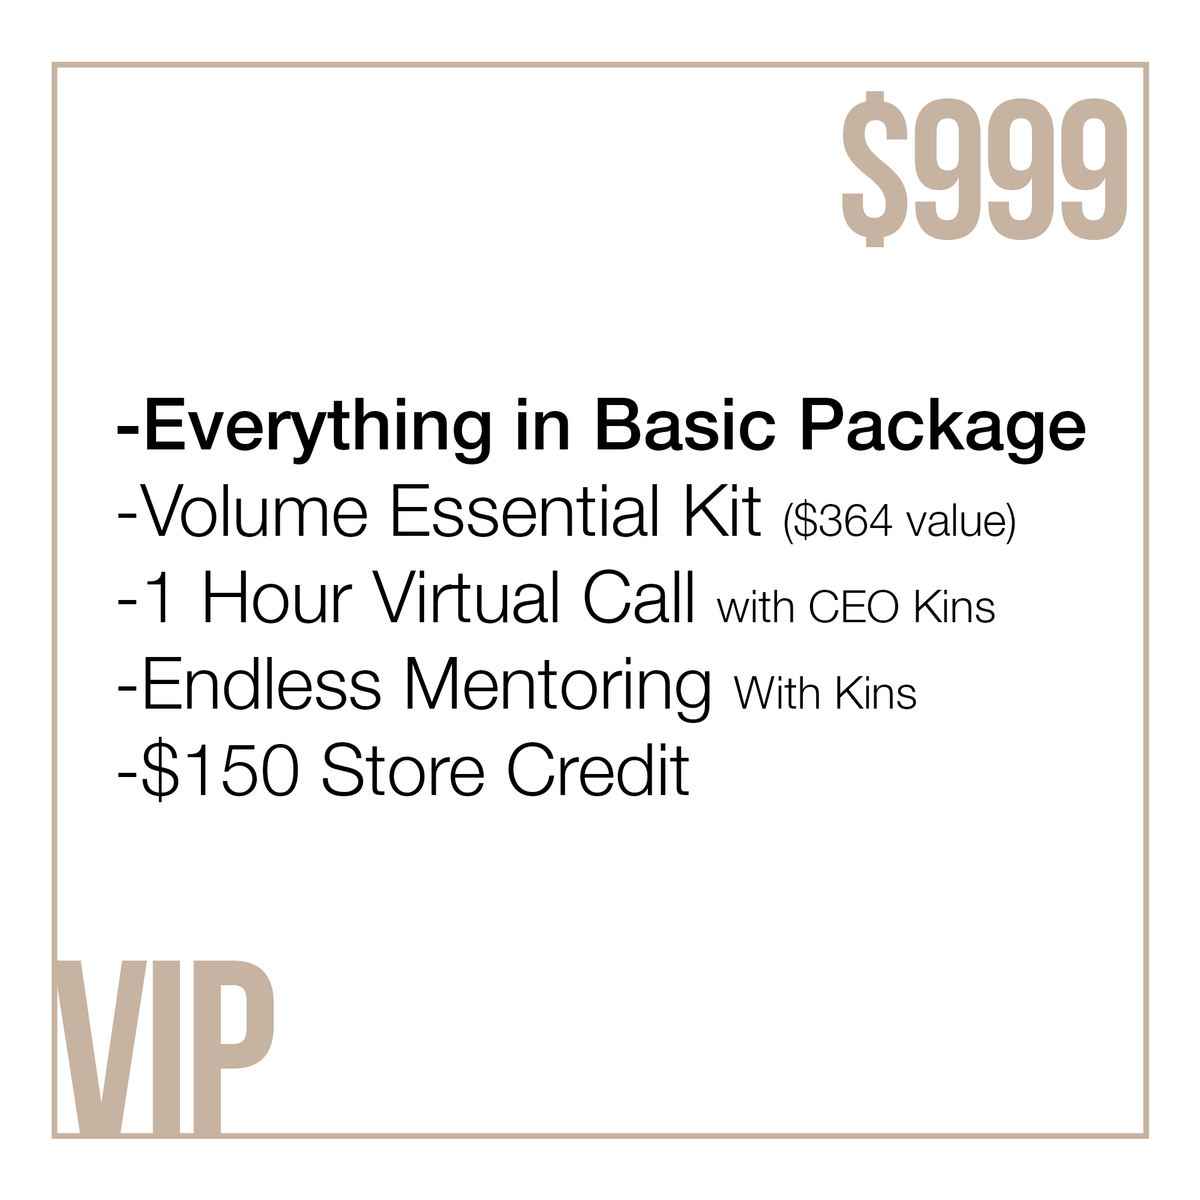 ONLINE PACKAGES VIP